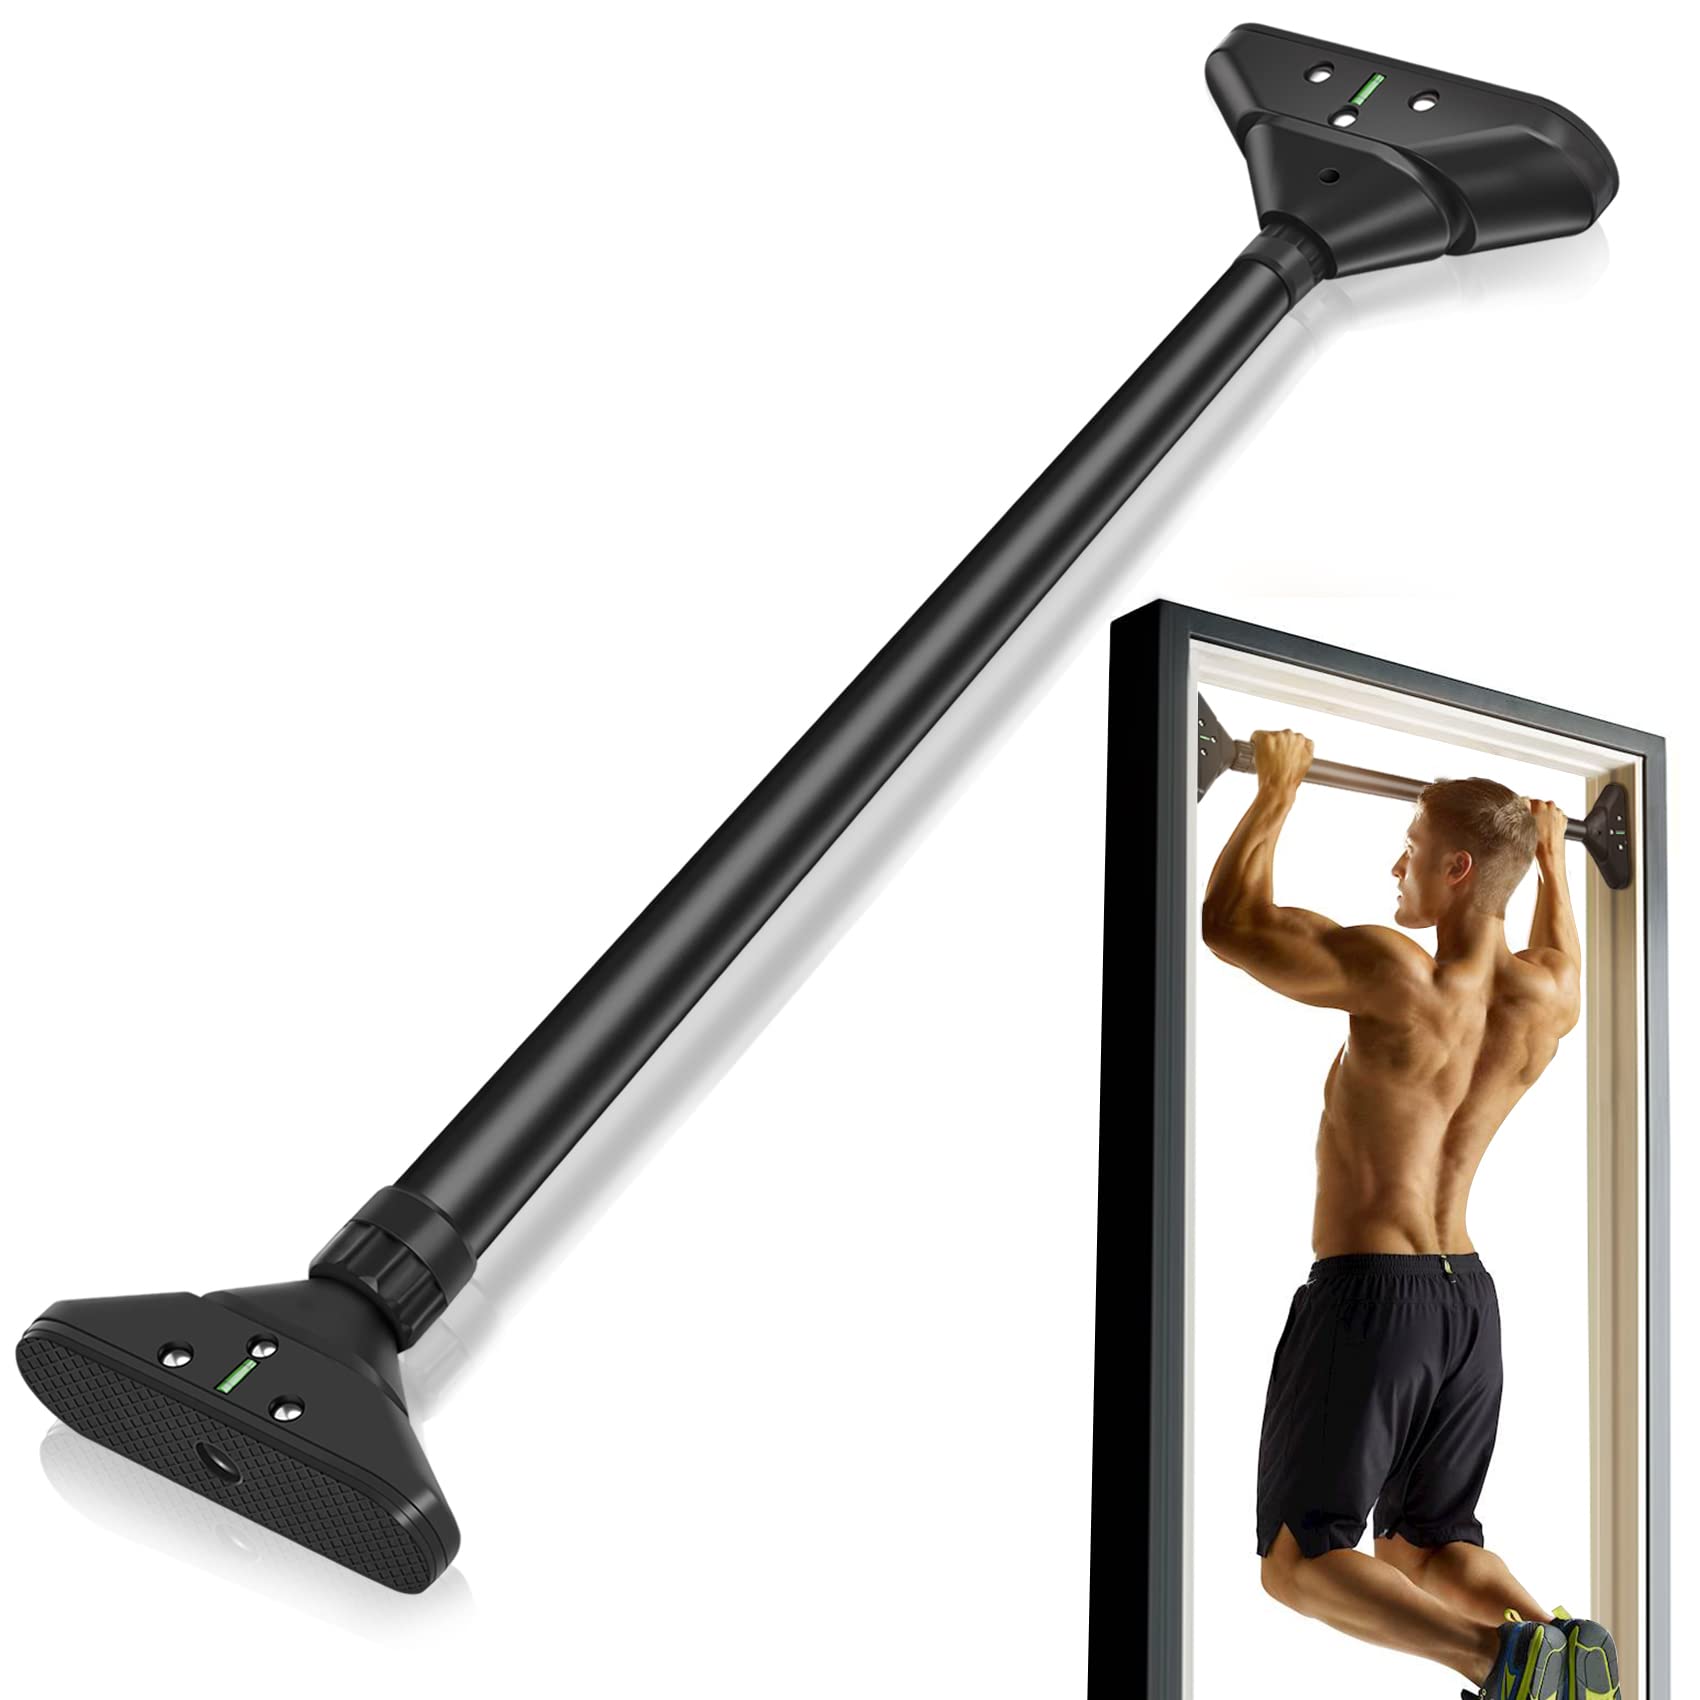 Hogimcty Pull Up Bar for Doorway, Strength Training Pullup Bar No Screw Installation, Pull Up Bar with Adjustable Width Locking 